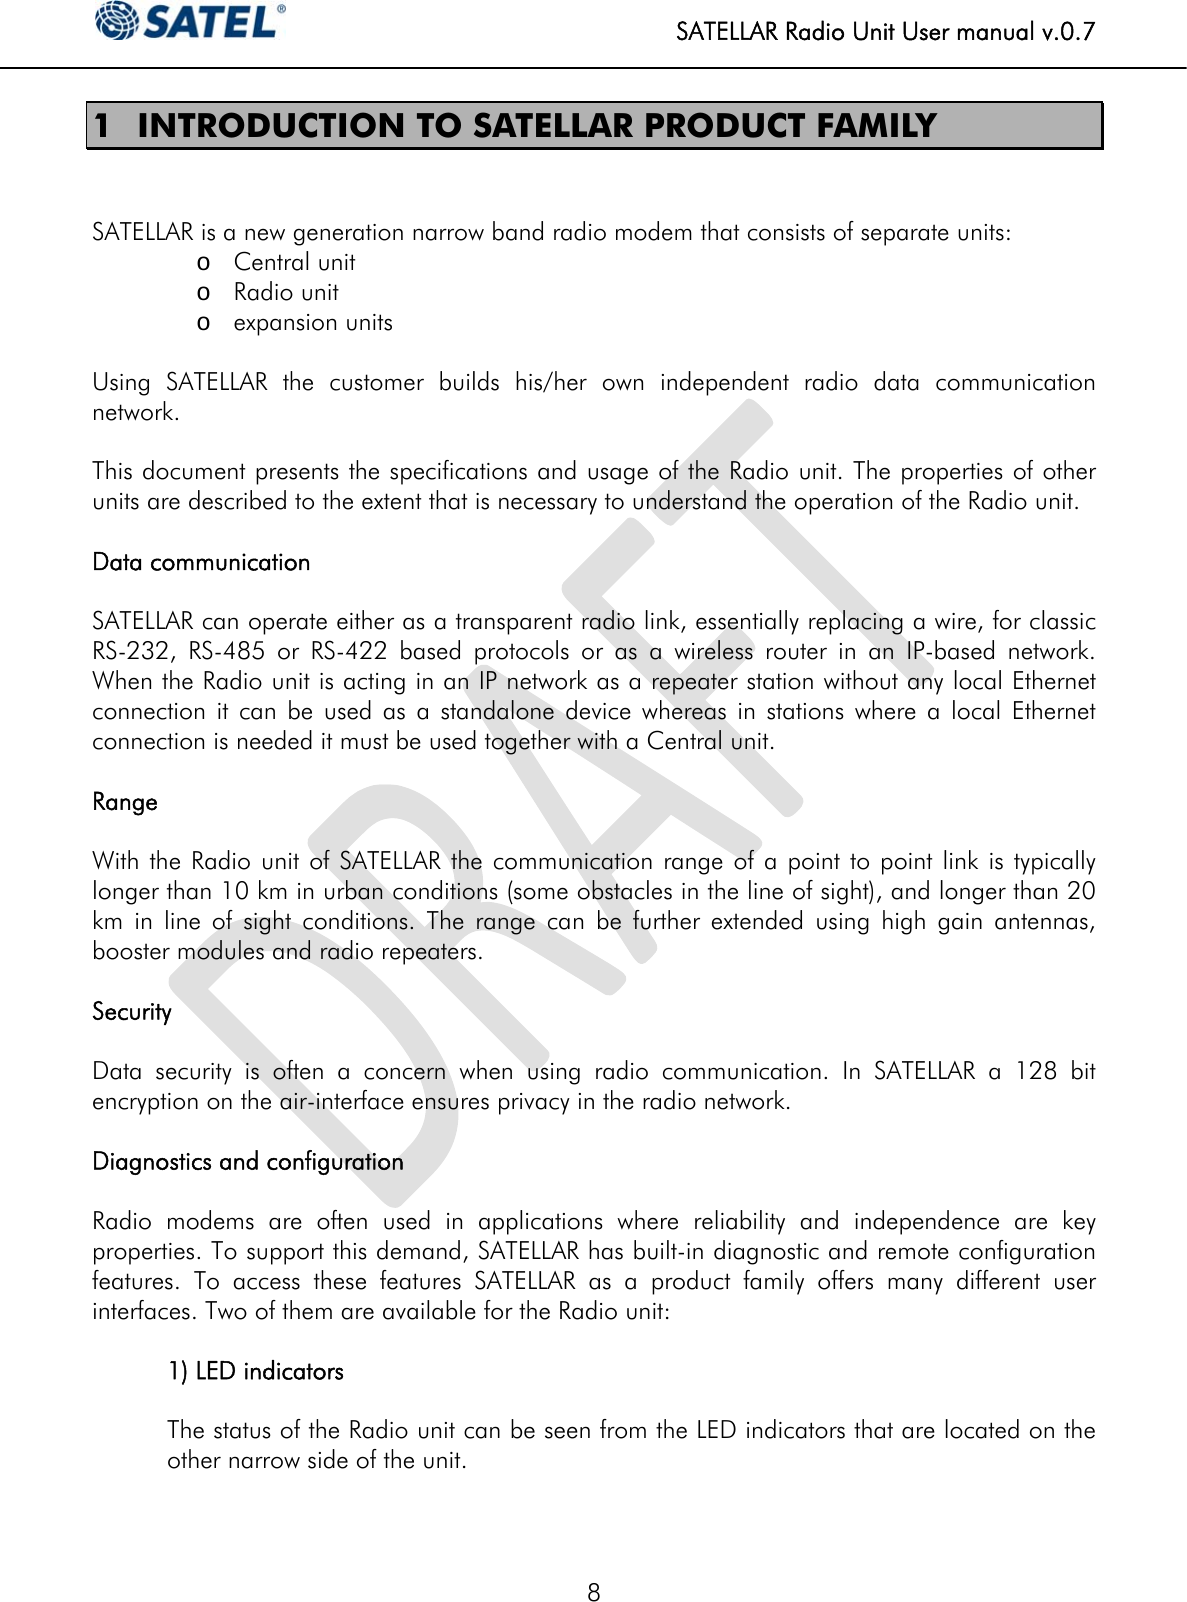   SATELLAR Radio Unit User manual v.0.7  8 1 INTRODUCTION TO SATELLAR PRODUCT FAMILY   SATELLAR is a new generation narrow band radio modem that consists of separate units:  o Central unit o Radio unit o expansion units  Using SATELLAR the customer builds his/her own independent radio data communication network.   This document presents the specifications and usage of the Radio unit. The properties of other units are described to the extent that is necessary to understand the operation of the Radio unit.  Data communication  SATELLAR can operate either as a transparent radio link, essentially replacing a wire, for classic RS-232, RS-485 or RS-422 based protocols or as a wireless router in an IP-based network. When the Radio unit is acting in an IP network as a repeater station without any local Ethernet connection it can be used as a standalone device whereas in stations where a local Ethernet connection is needed it must be used together with a Central unit.  Range  With the Radio unit of SATELLAR the communication range of a point to point link is typically longer than 10 km in urban conditions (some obstacles in the line of sight), and longer than 20 km in line of sight conditions. The range can be further extended using high gain antennas, booster modules and radio repeaters.  Security  Data security is often a concern when using radio communication. In SATELLAR a 128 bit encryption on the air-interface ensures privacy in the radio network.   Diagnostics and configuration  Radio modems are often used in applications where reliability and independence are key properties. To support this demand, SATELLAR has built-in diagnostic and remote configuration features. To access these features SATELLAR as a product family offers many different user interfaces. Two of them are available for the Radio unit:  1) LED indicators  The status of the Radio unit can be seen from the LED indicators that are located on the other narrow side of the unit.  